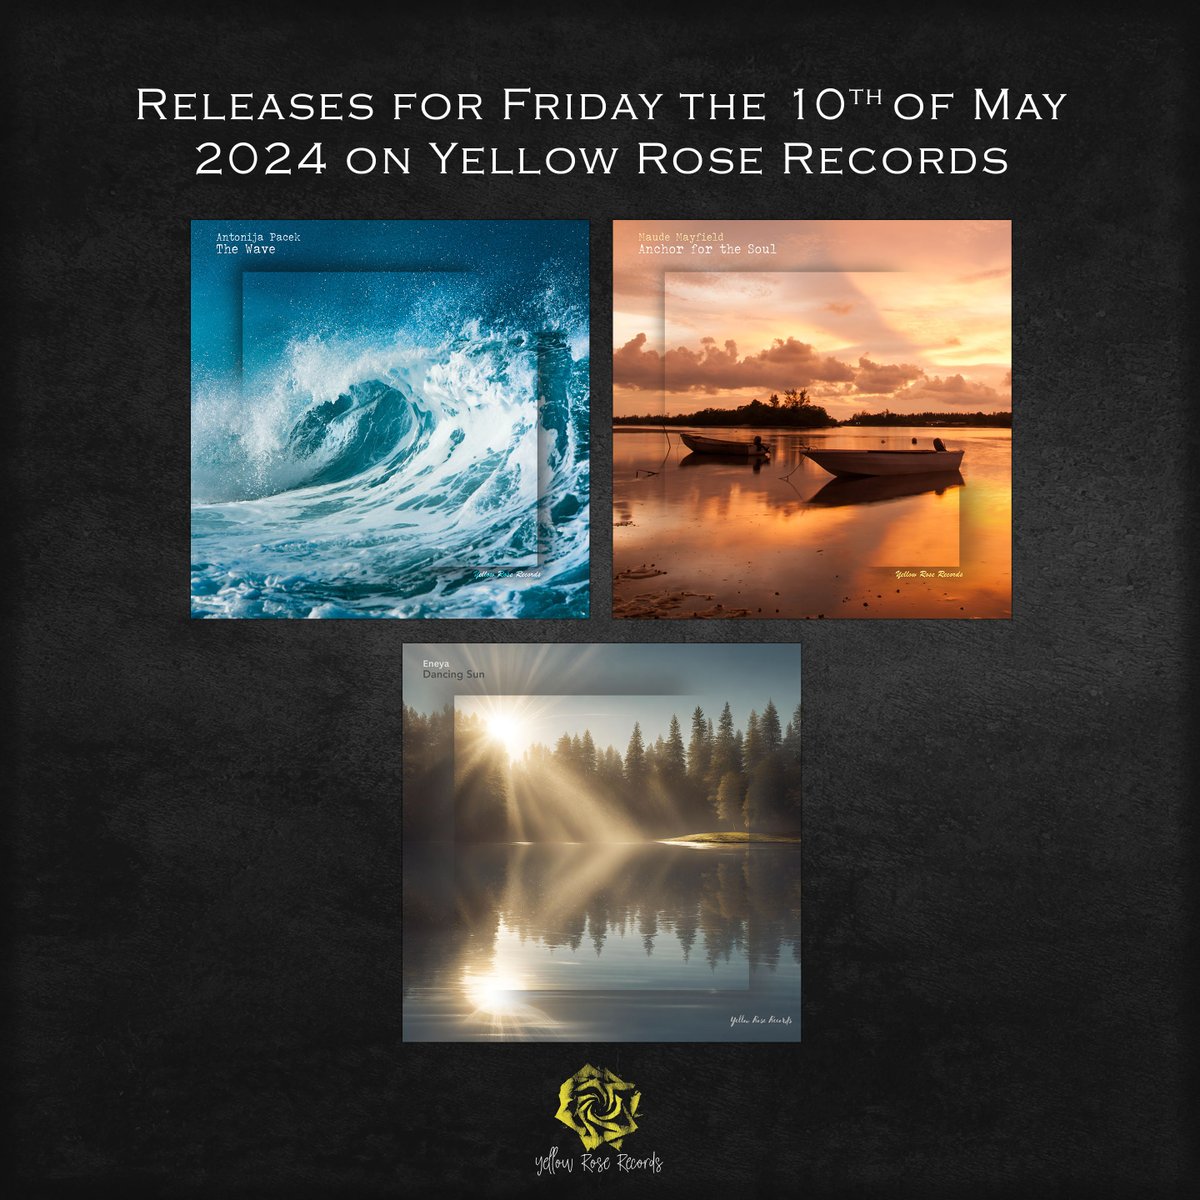 Releases on Yellow Rose Records for the 10th of May 2024 Antonija Pacek - The Wave Maude Mayfield - Anchor For The Soul Eneya - Dancing Sun #ModernClassical #Contemporary #Relaxing #Peaceful #Calm